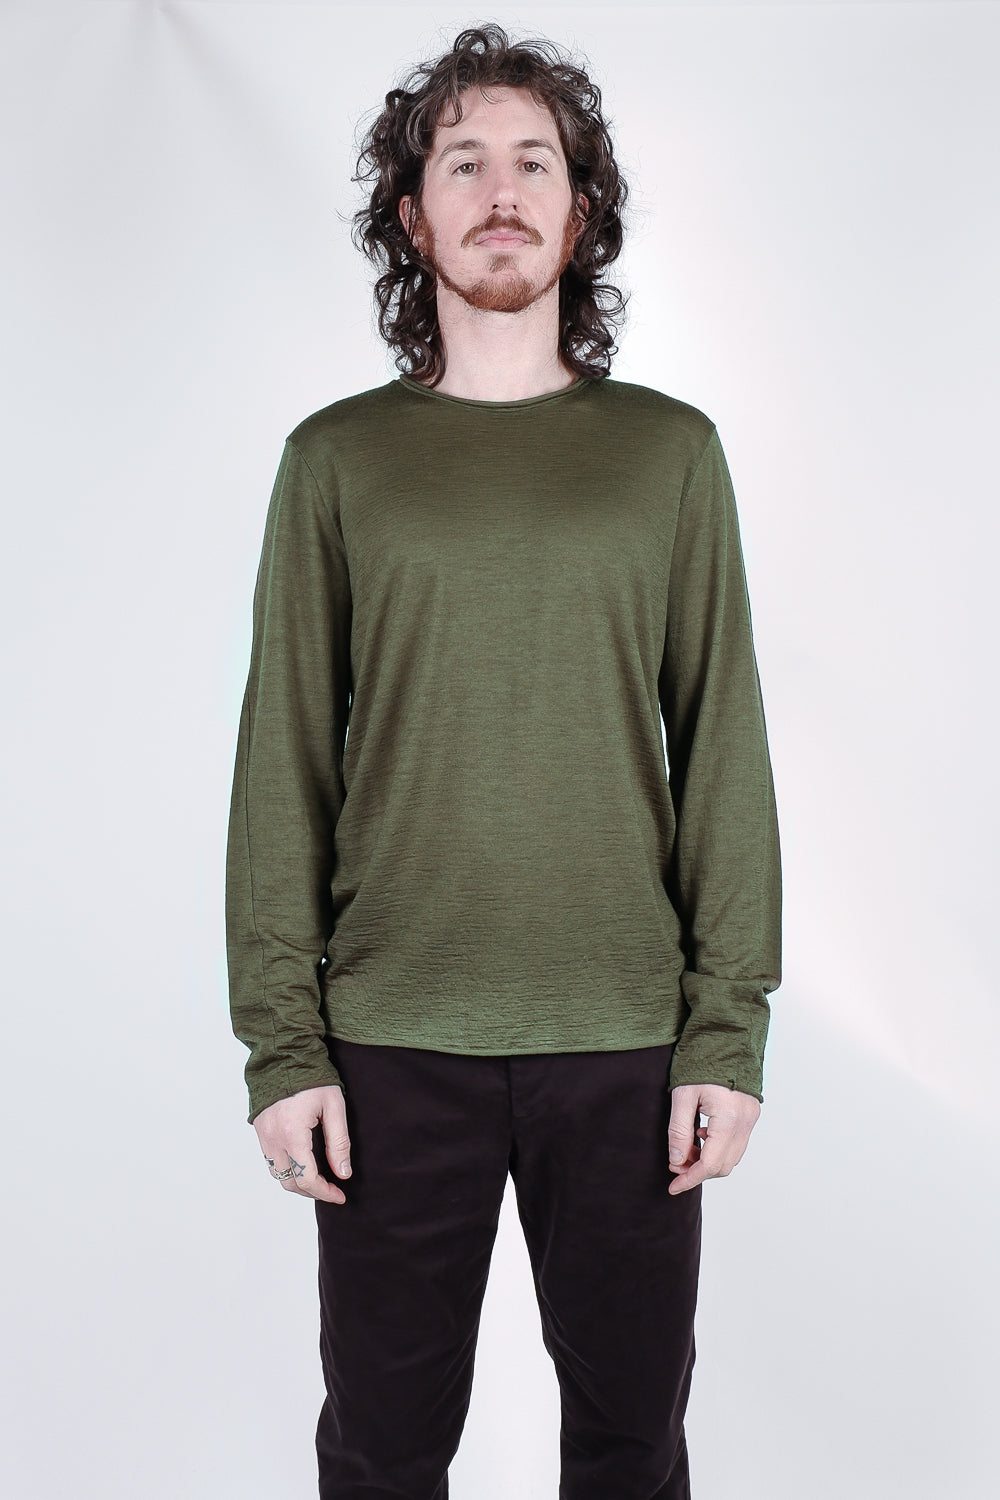 Buy the Transit L/S Wool T-Shirt in Khaki at Intro. Spend £50 for free UK delivery. Official stockists. We ship worldwide.